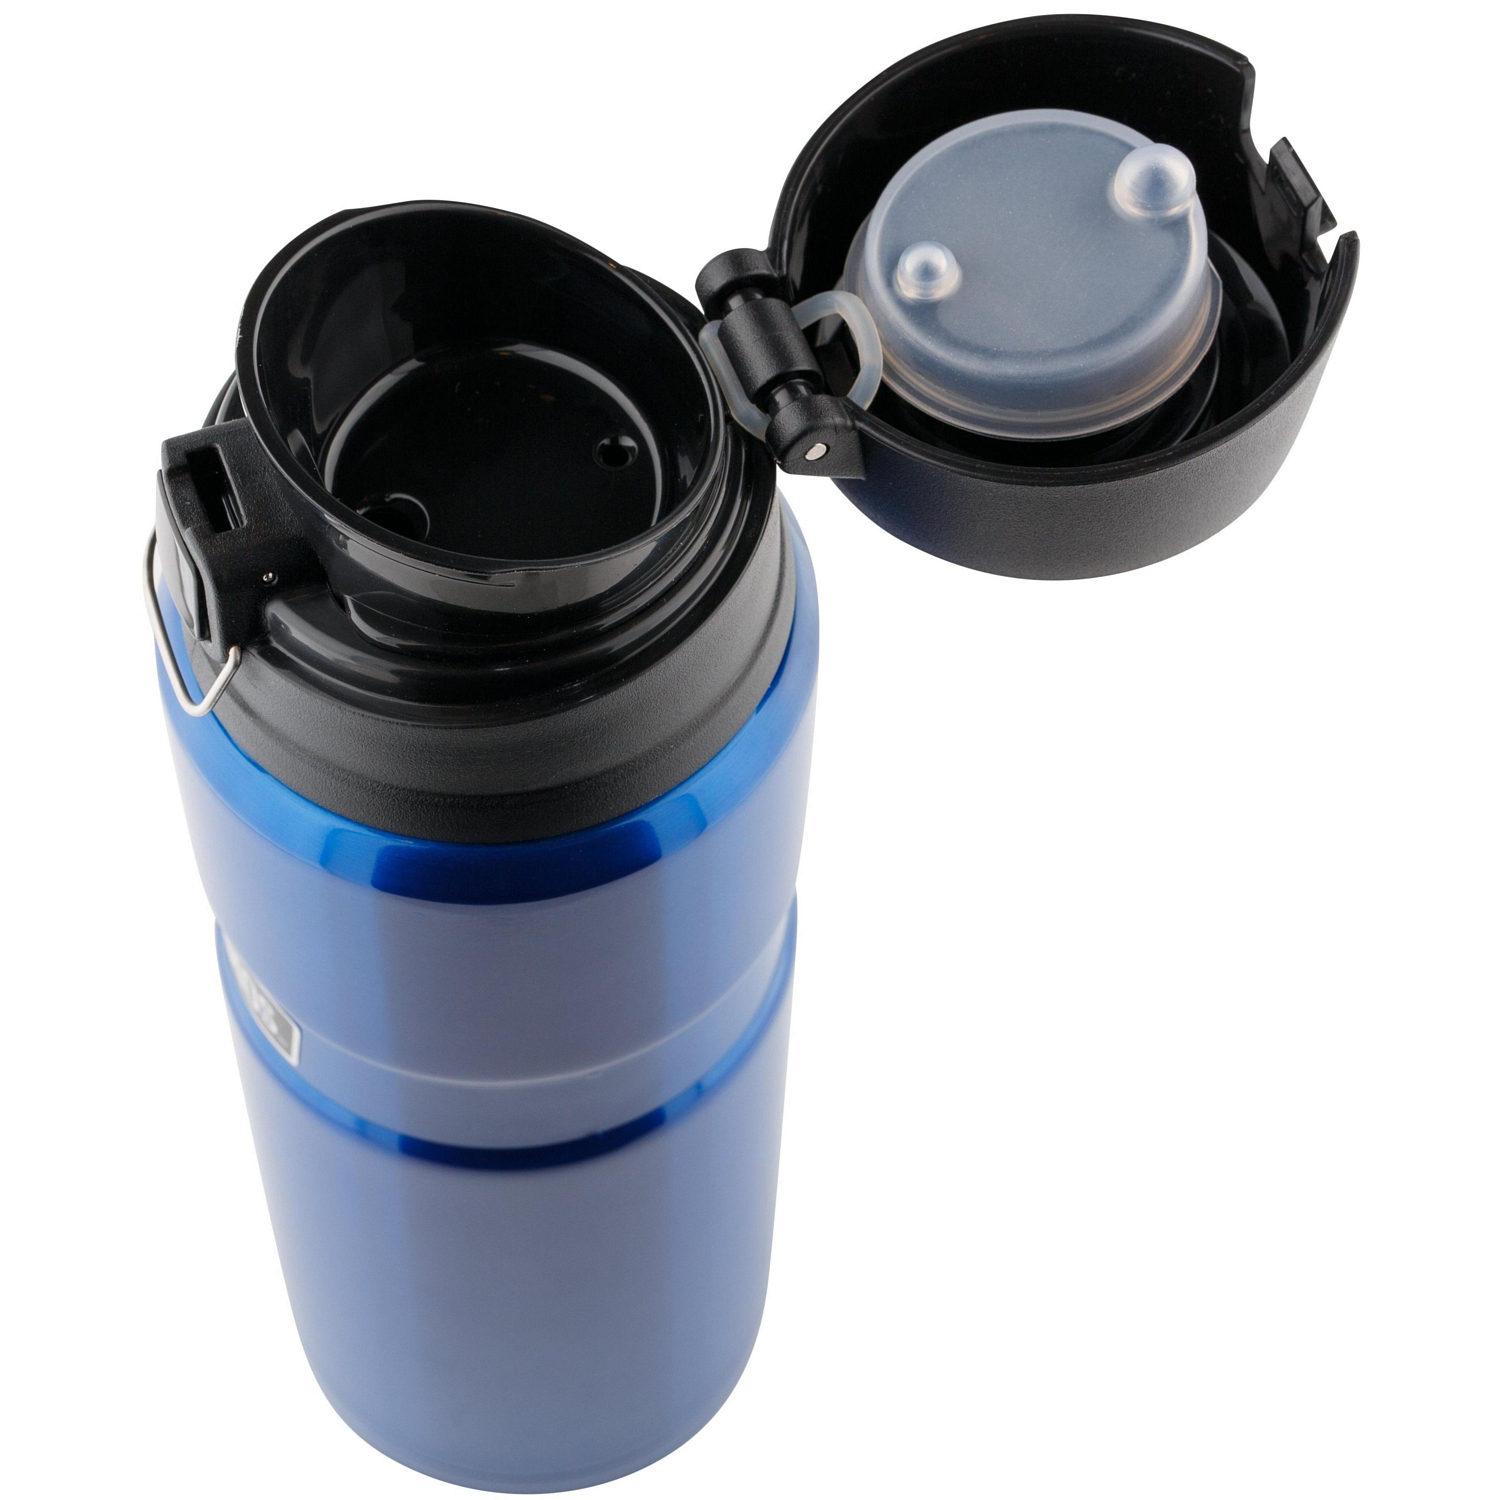 Термос Thermos SK4000 Stainless Steel 0.710L